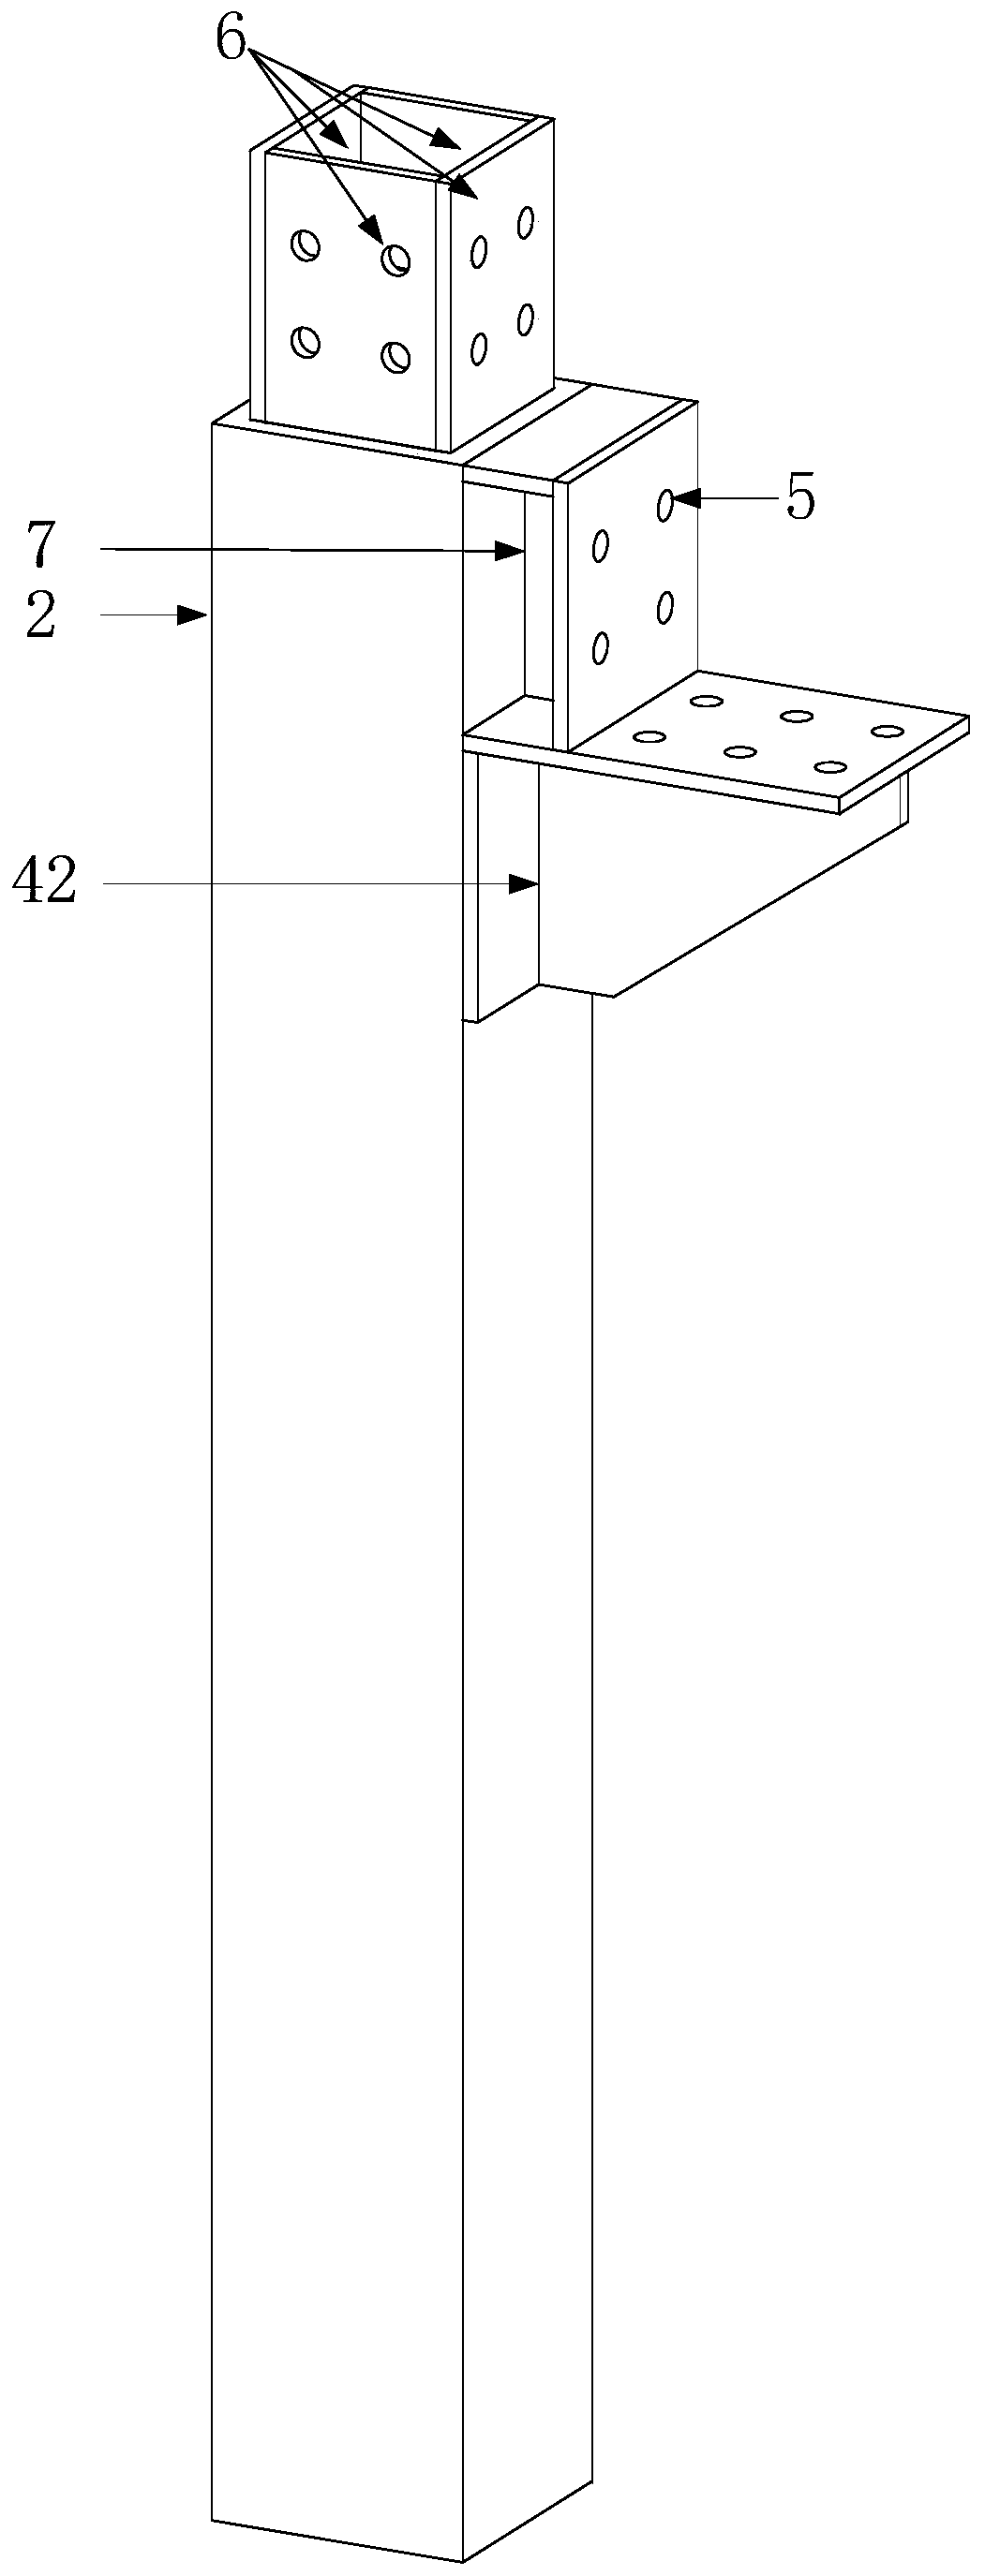 Beam-column joint for connecting end plates of square steel tube columns of prefabricated steel structure inner inserting plate